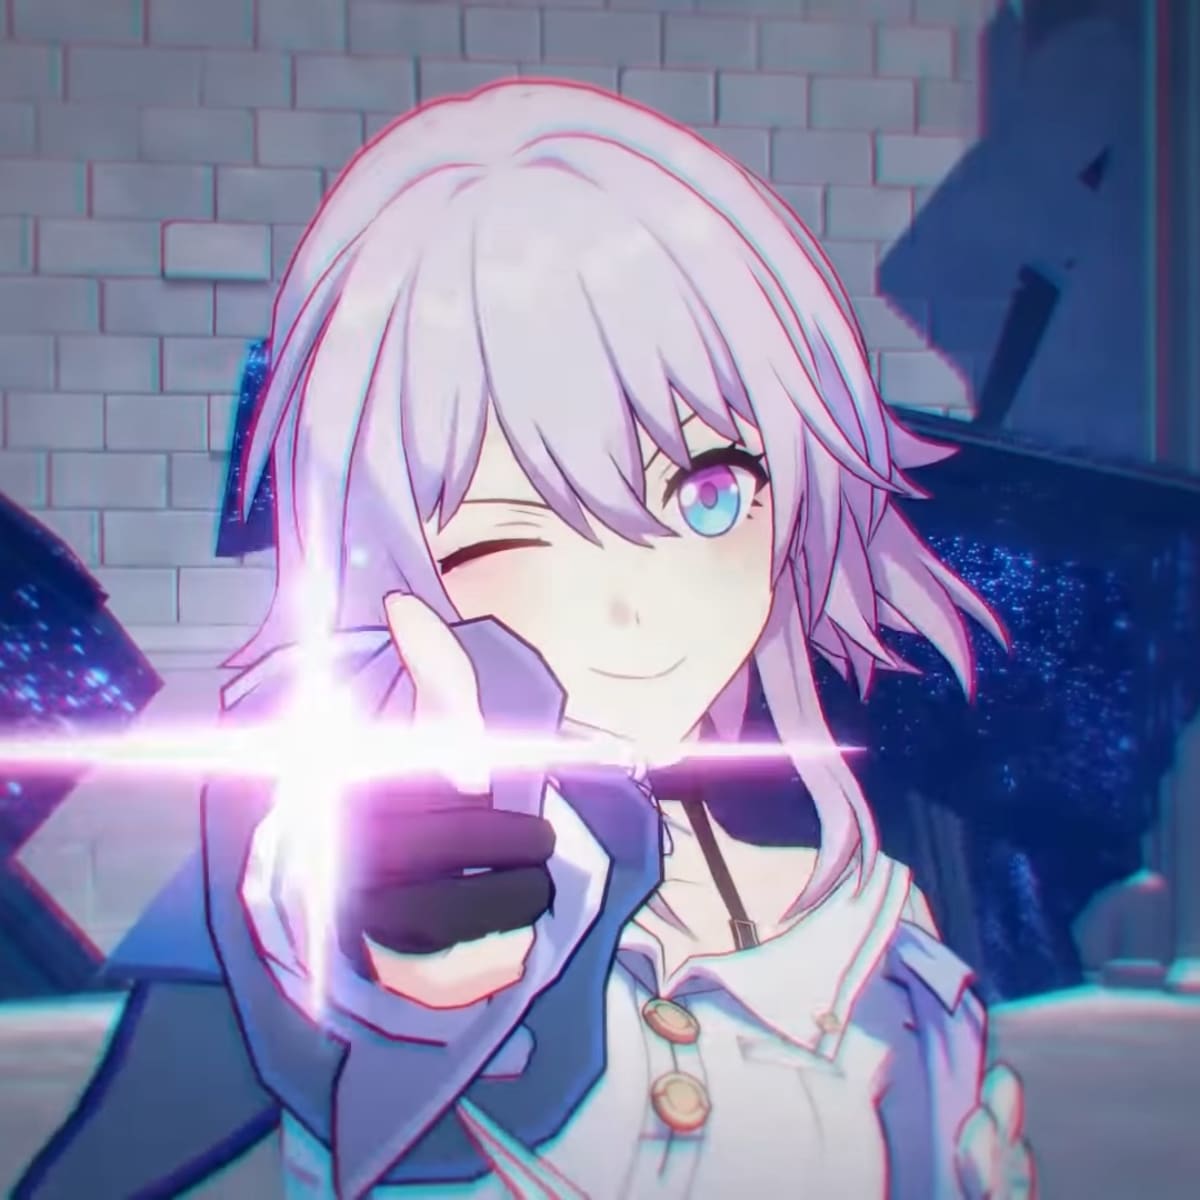 Honkai: Star Rail gets a release date and PlayStation version - Polygon